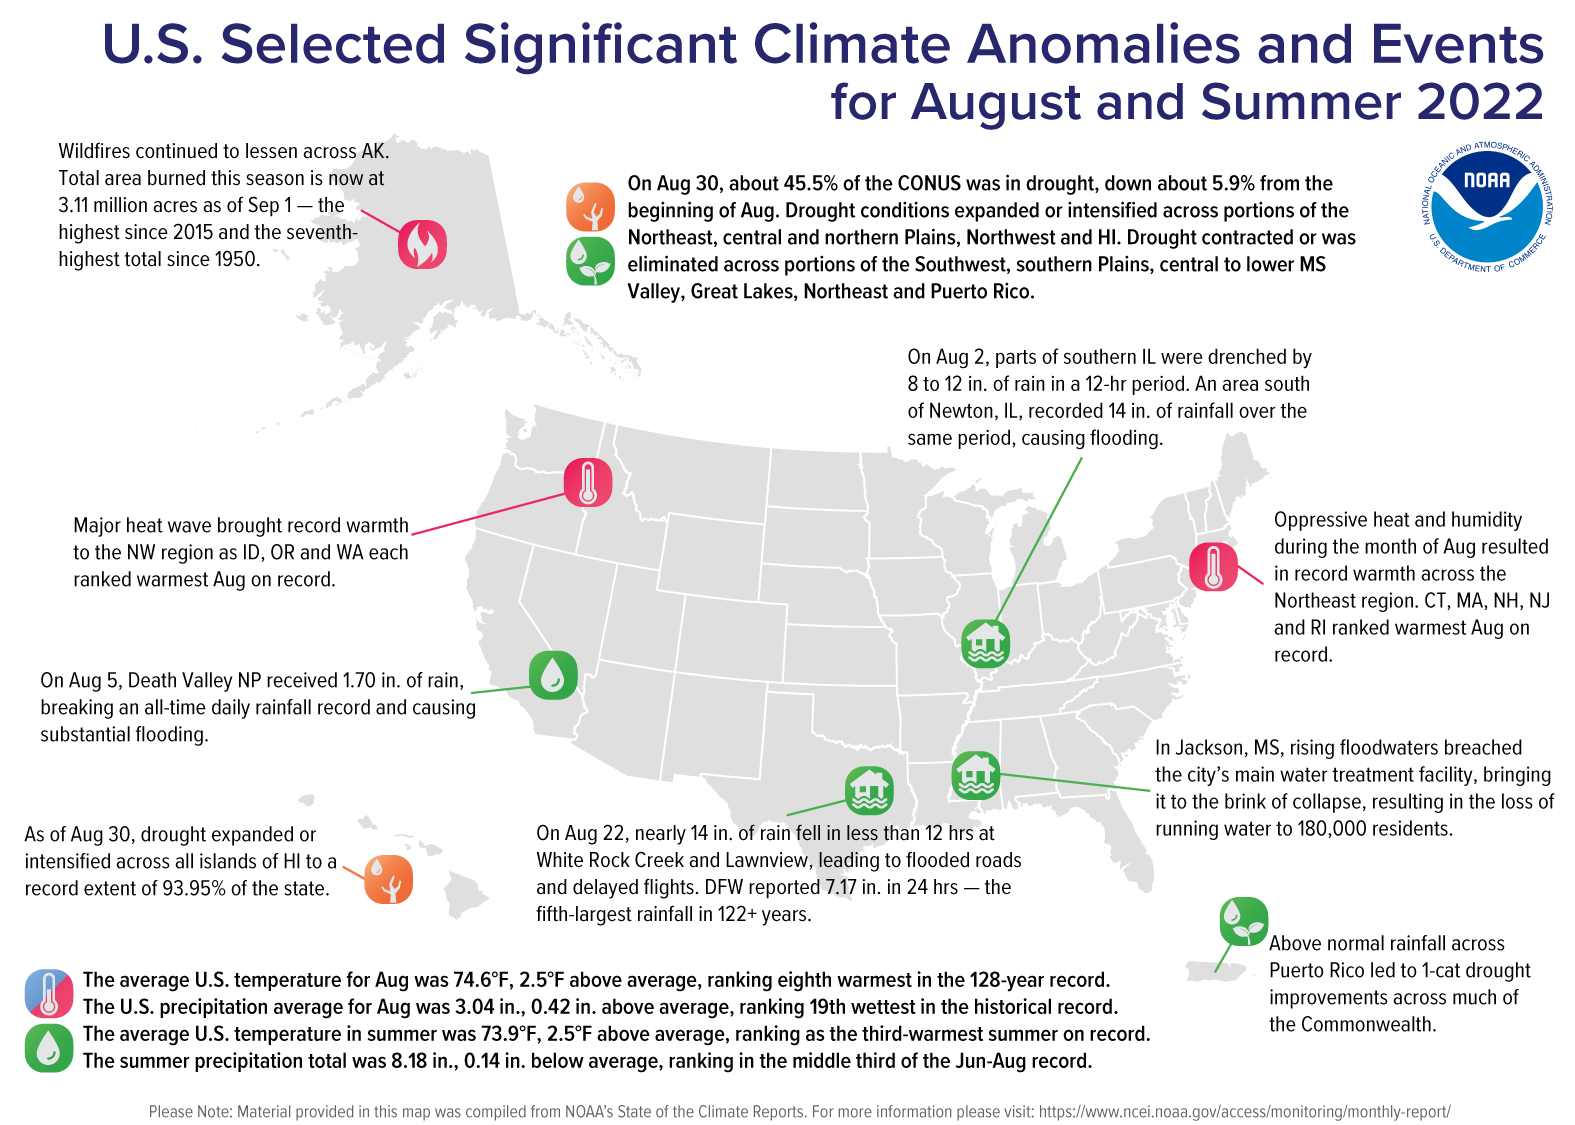 A map of the United States plotted with significant climate events that occurred during August and Summer 2022. 